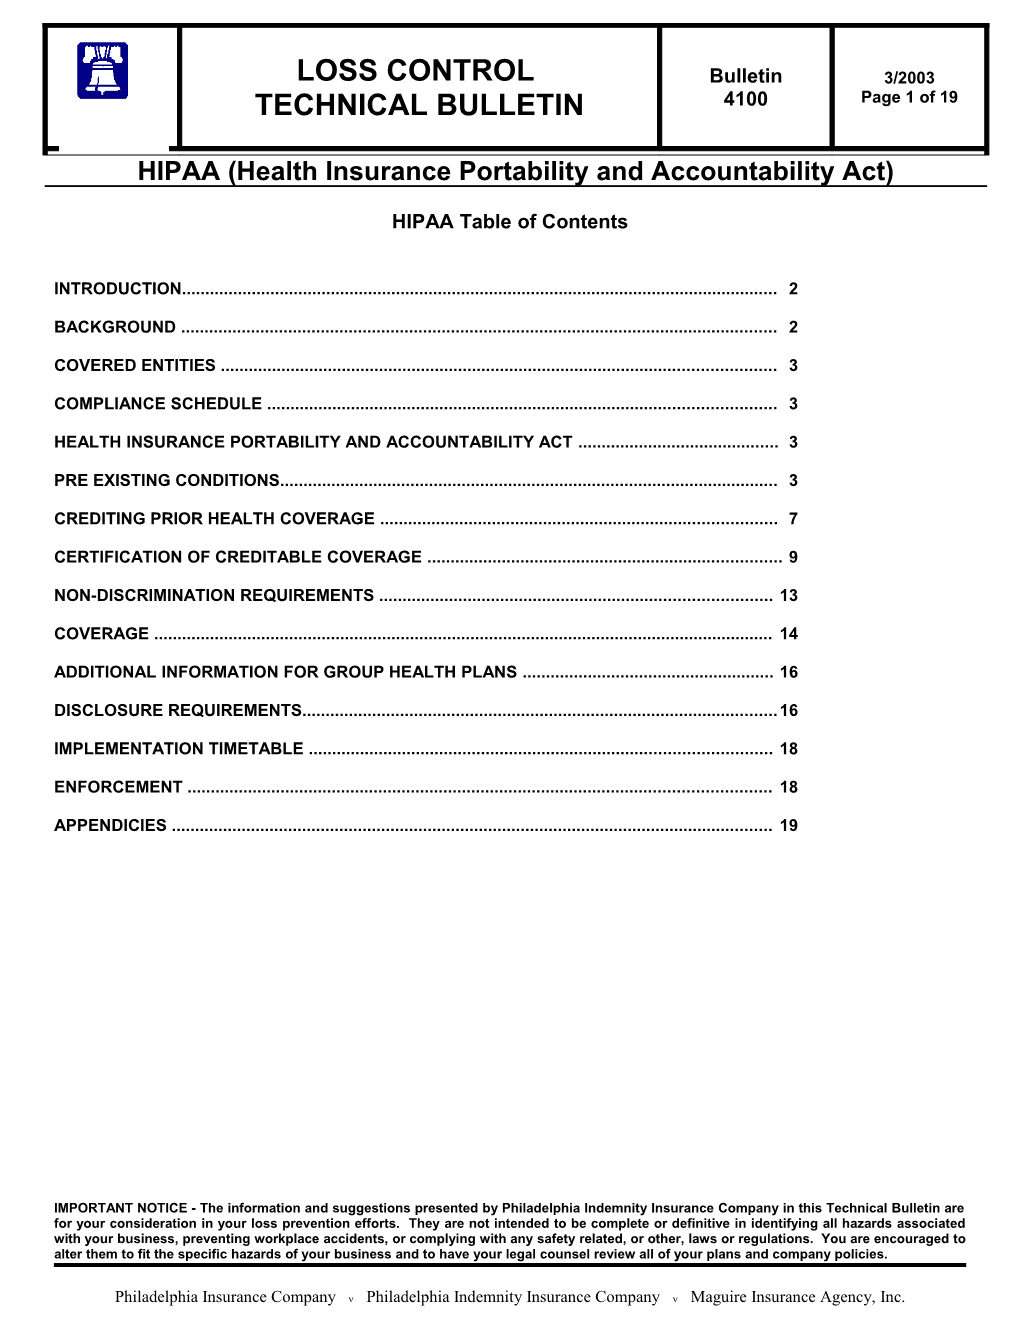 HIPAA Table of Contents